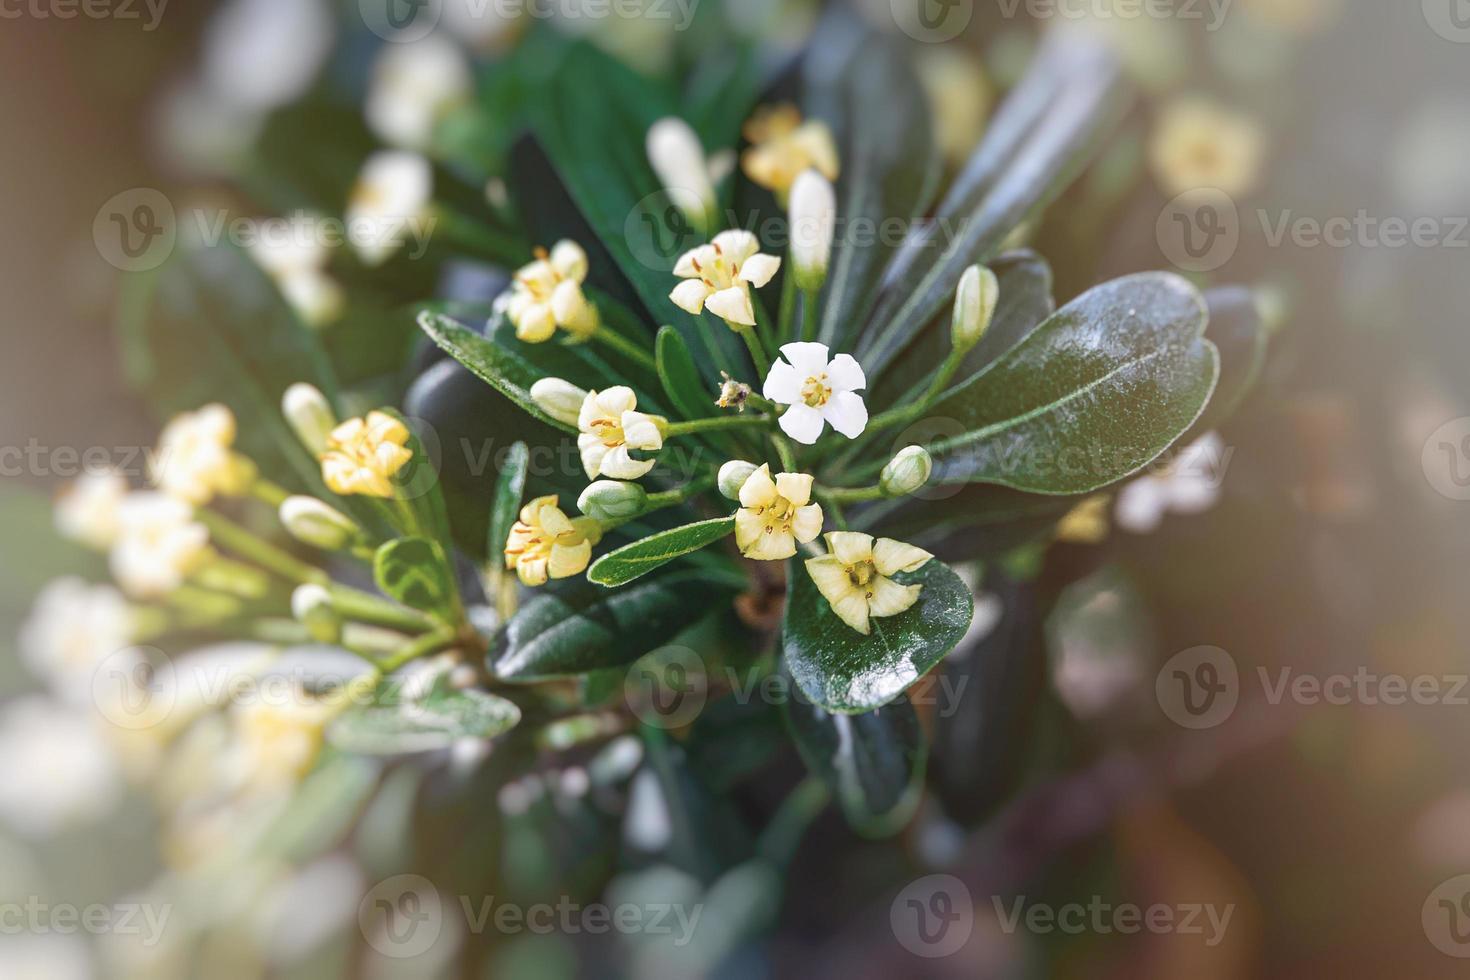 white flower of a bush close-up against a background of green leaves in sunshine spring day in the park photo